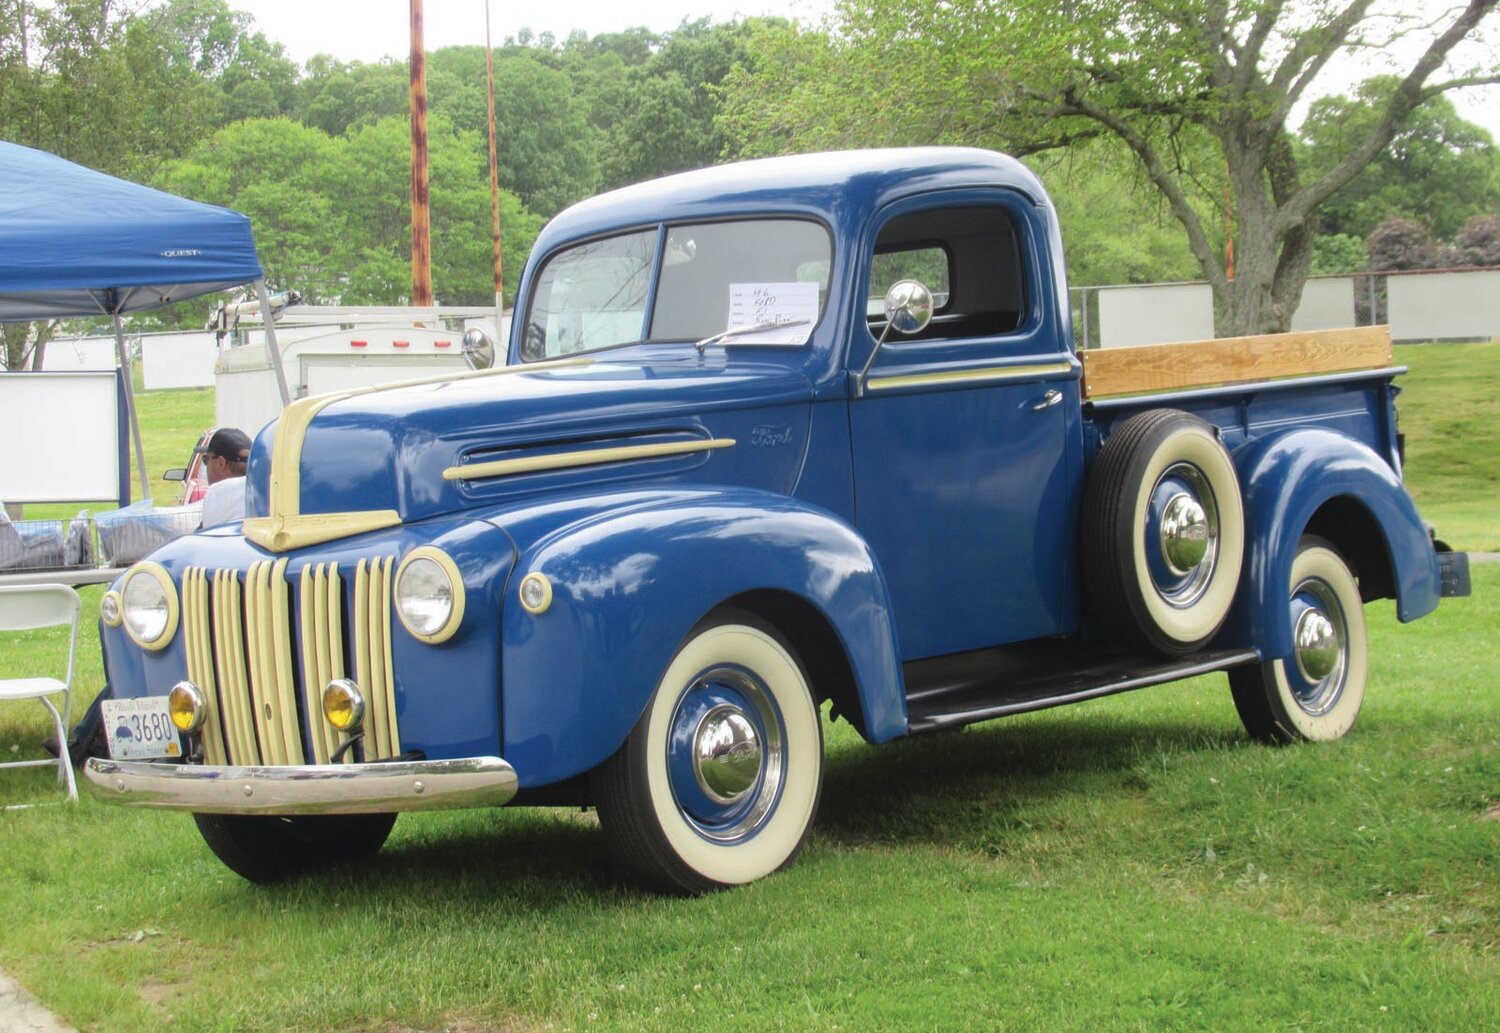 VINTAGE VEHICLE: Ron Rossi’s 1946 pickup drew rave reviews during Sunday’s Ocean State Vintage Haulers Show in Johnston.